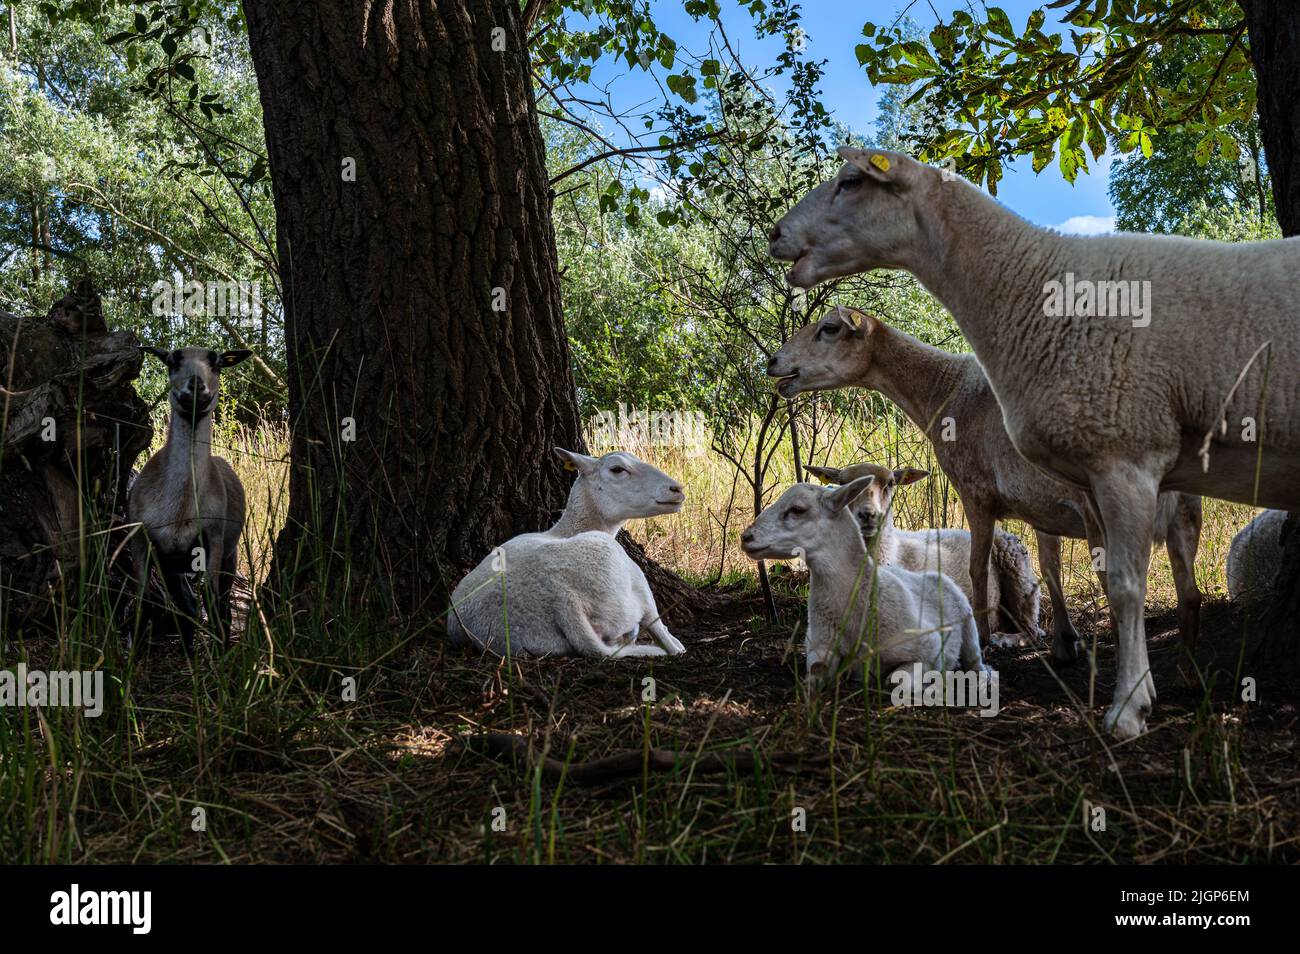 A flock of sheep stands under a tree in the midday heat Stock Photo